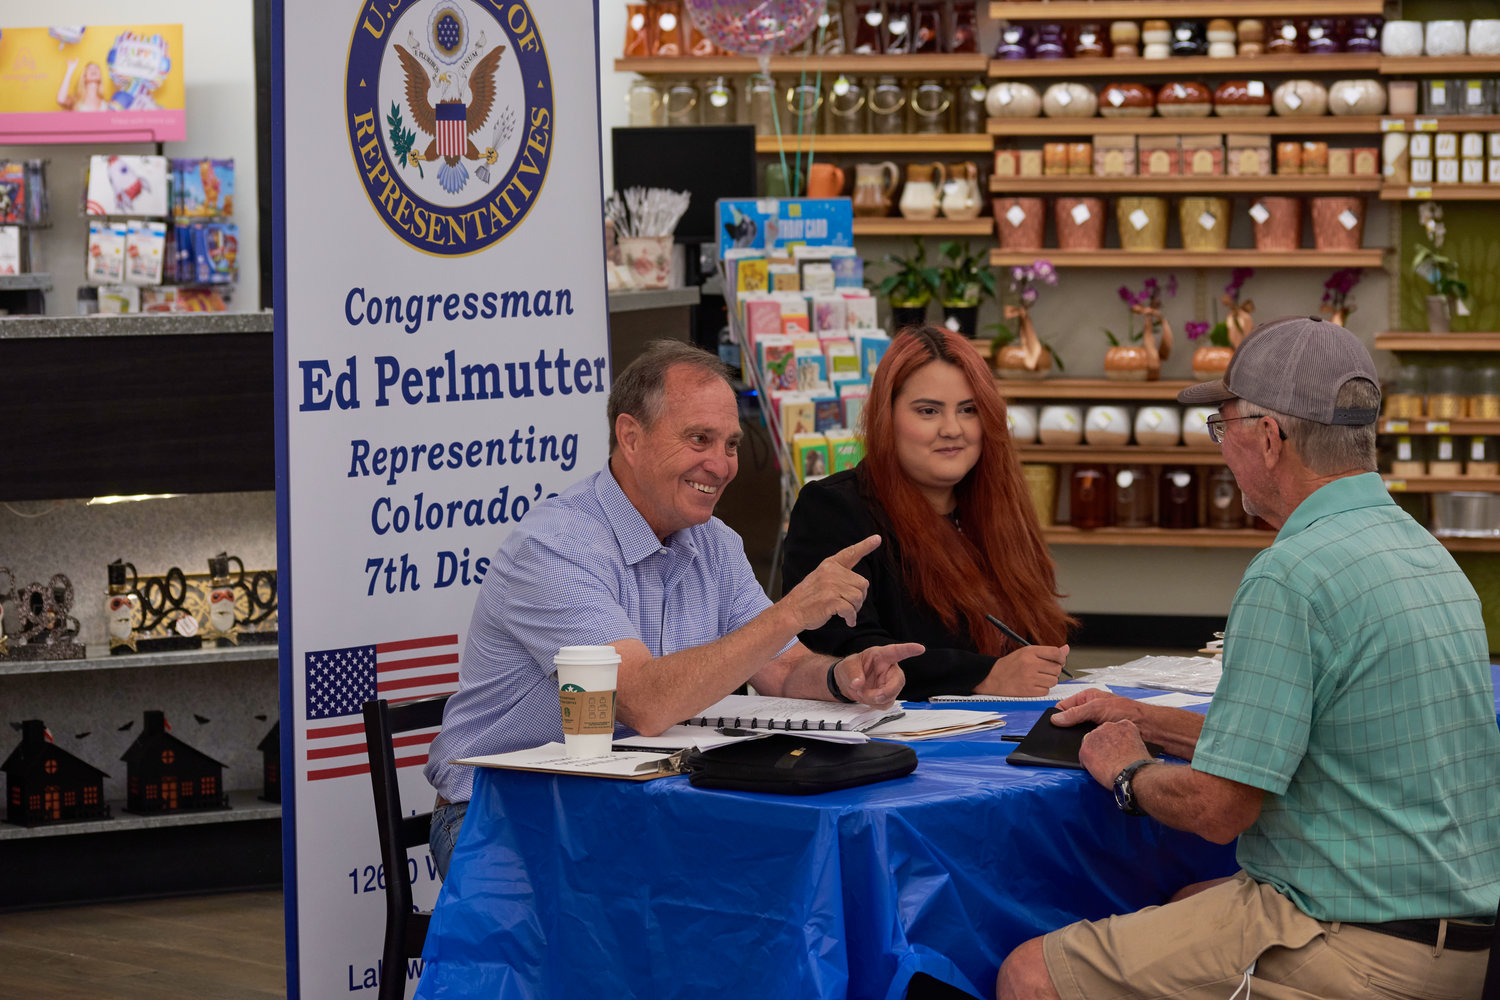 Buzzy Mann speaks with Congressman Ed Perlmutter at his final Government in the Grocery event.